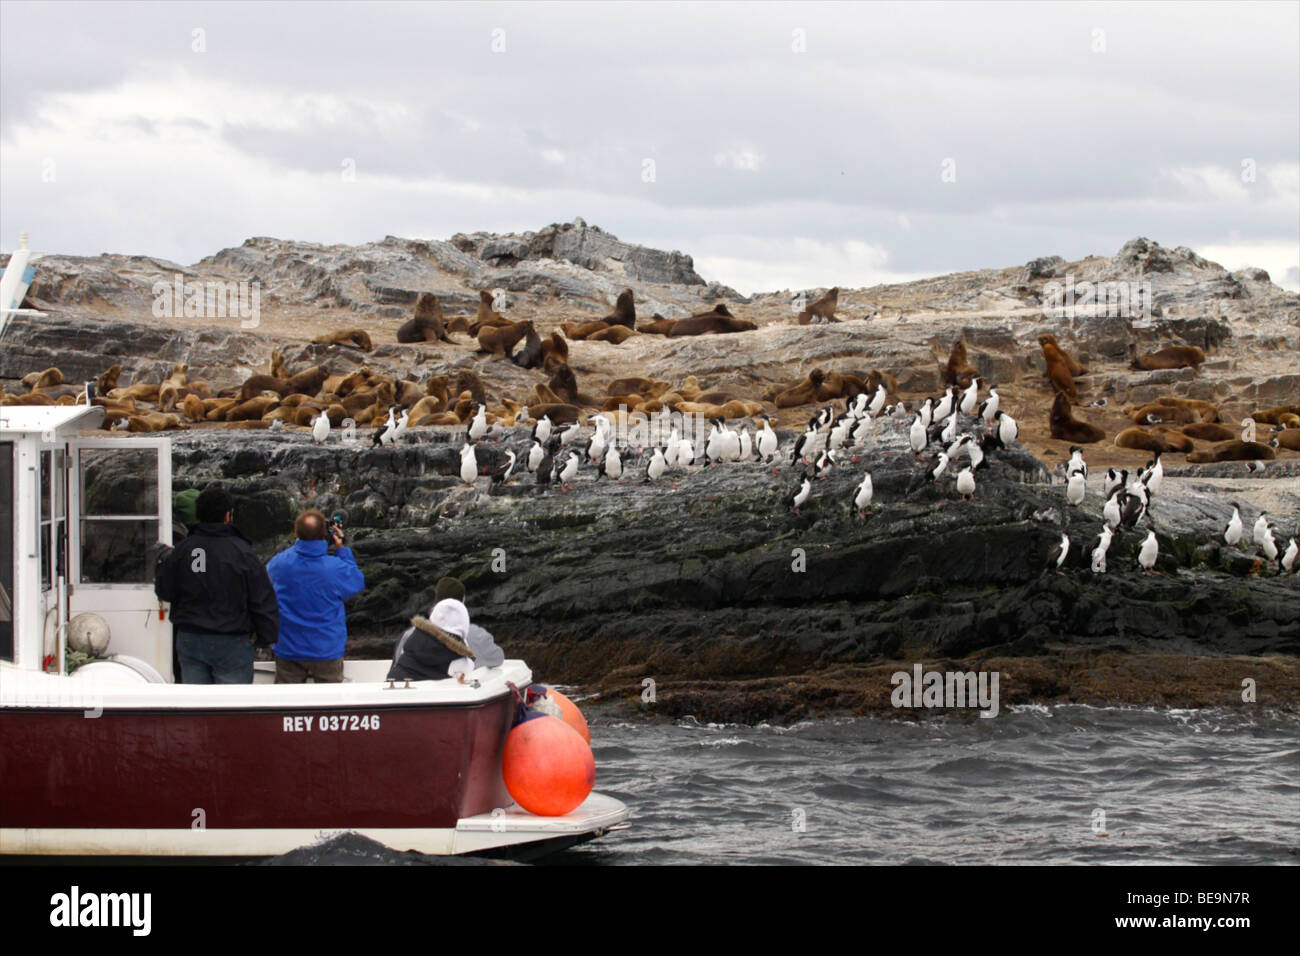 Patagonia (Argentina) : Sea lions and birds Stock Photo